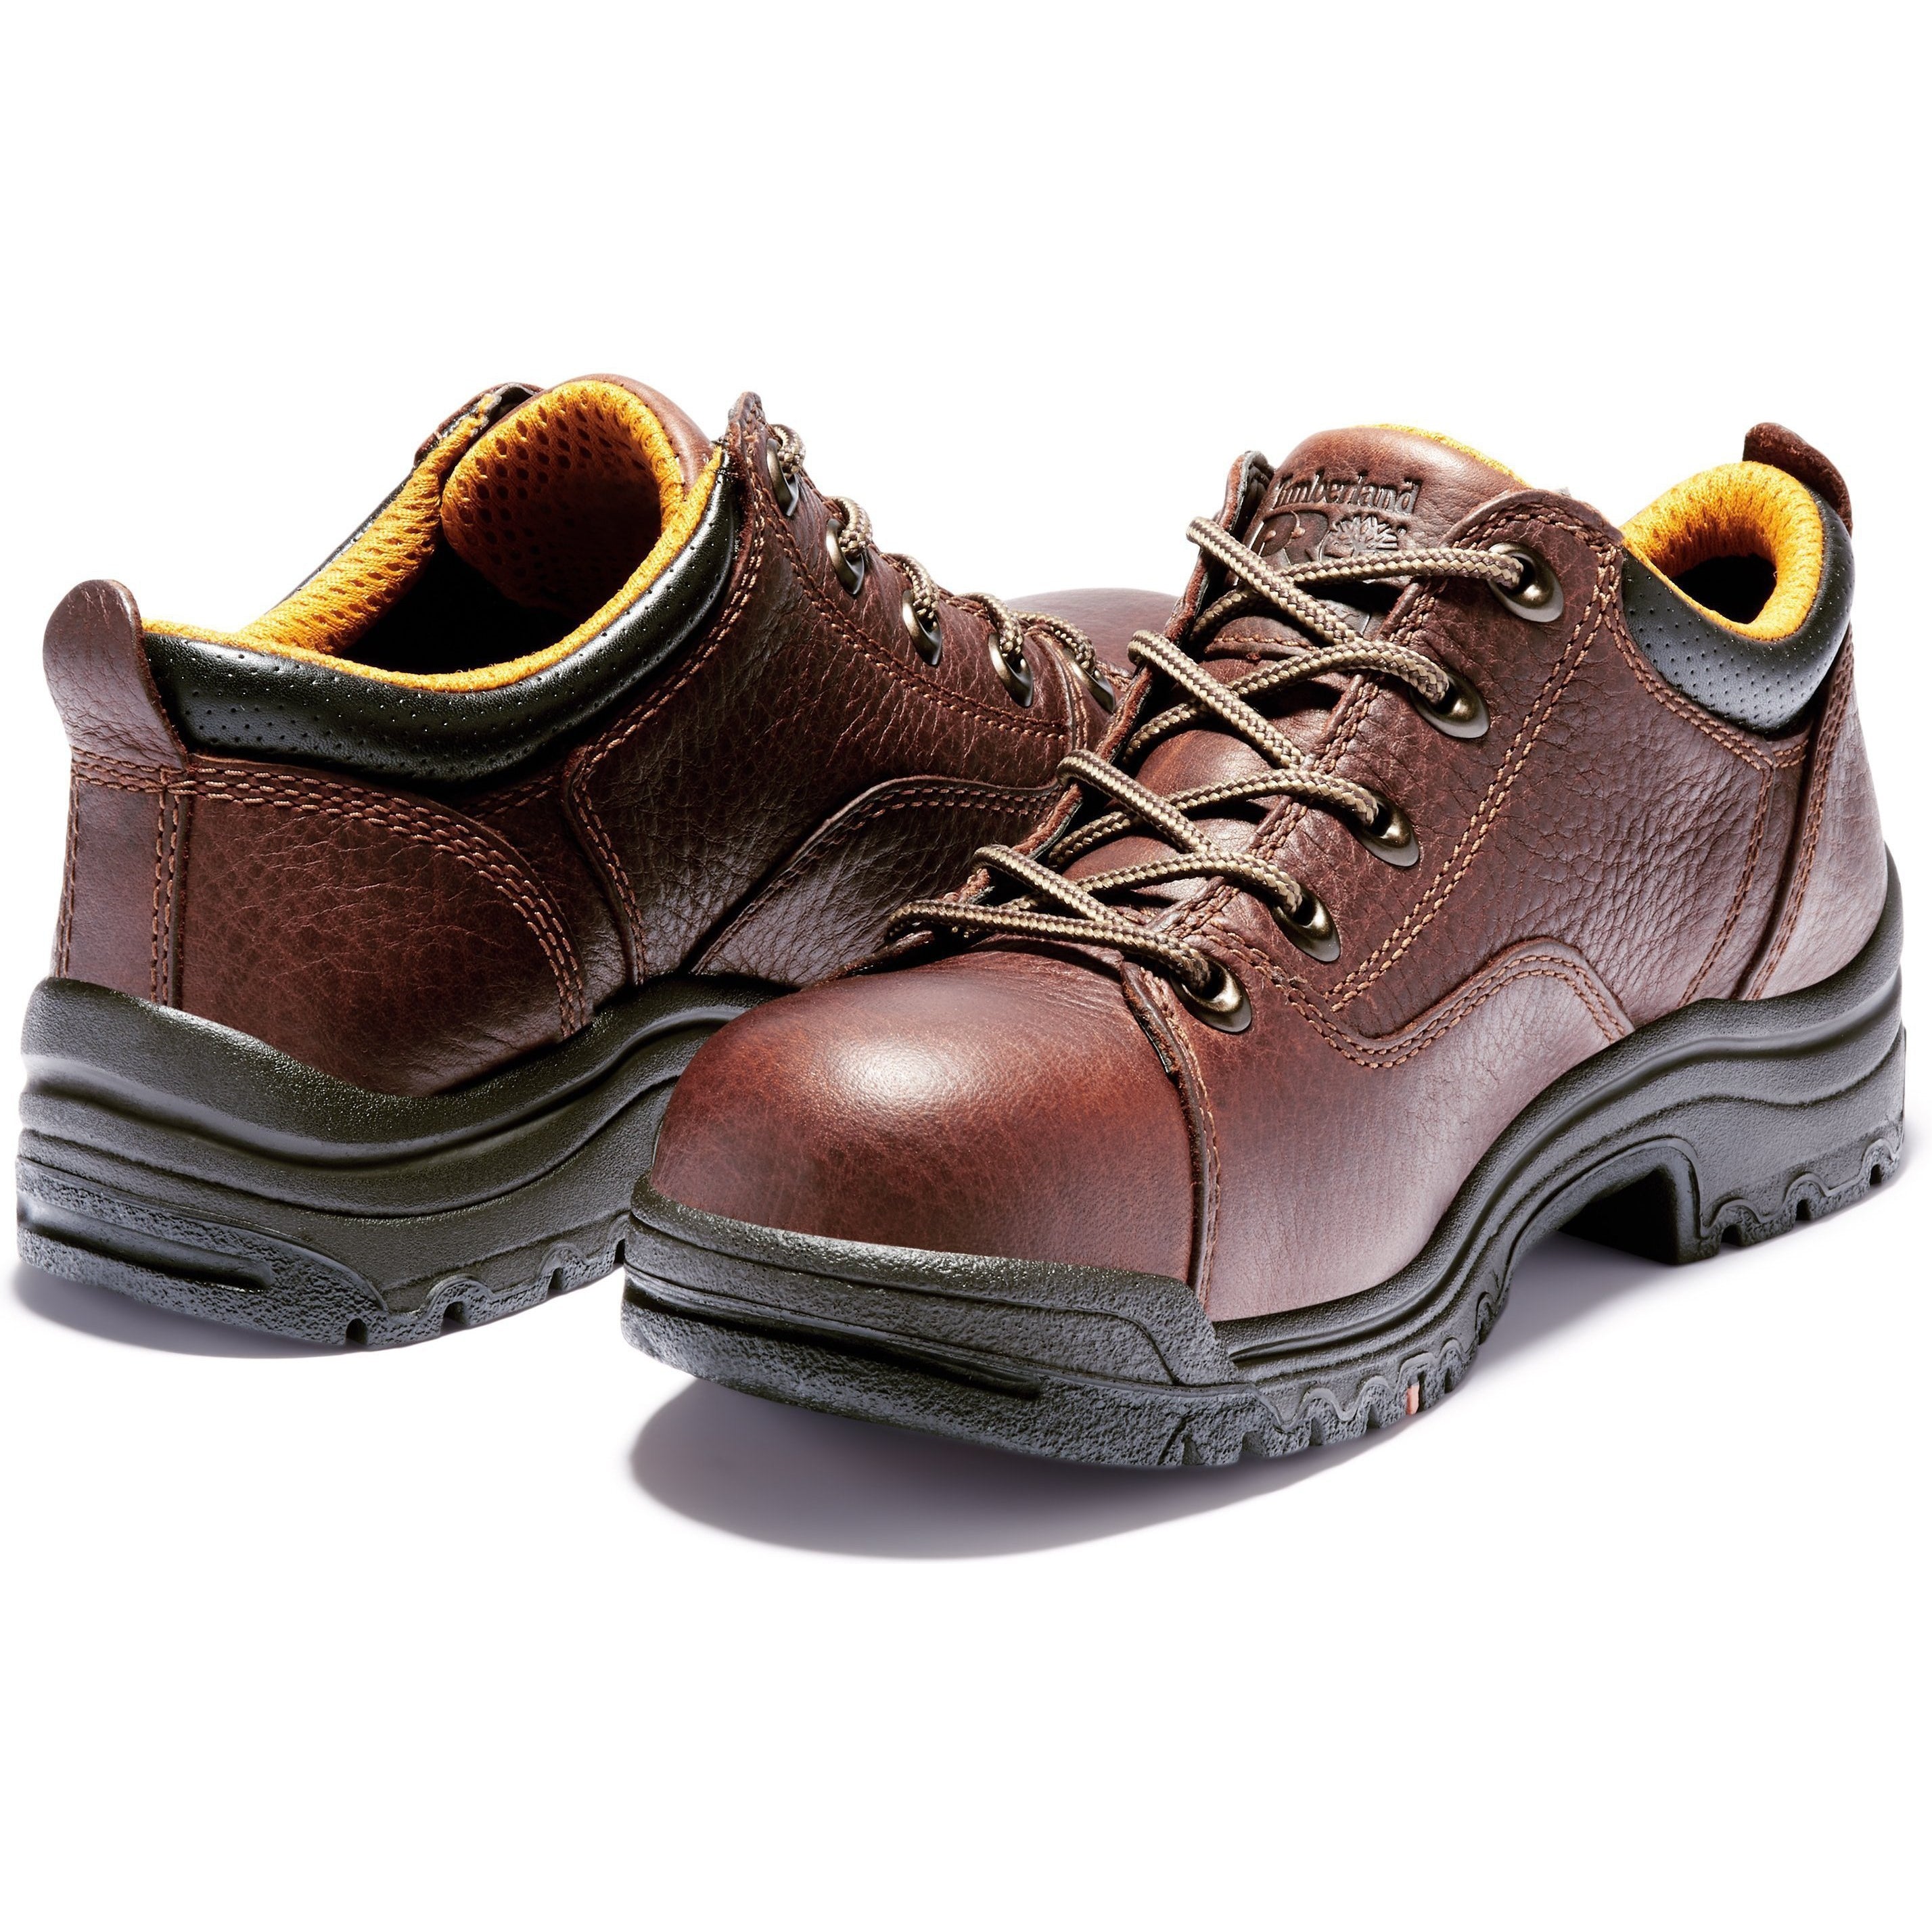 Timberland PRO Women's TITAN Alloy Toe Oxford Work Shoe - Brown - TB063189214  - Overlook Boots